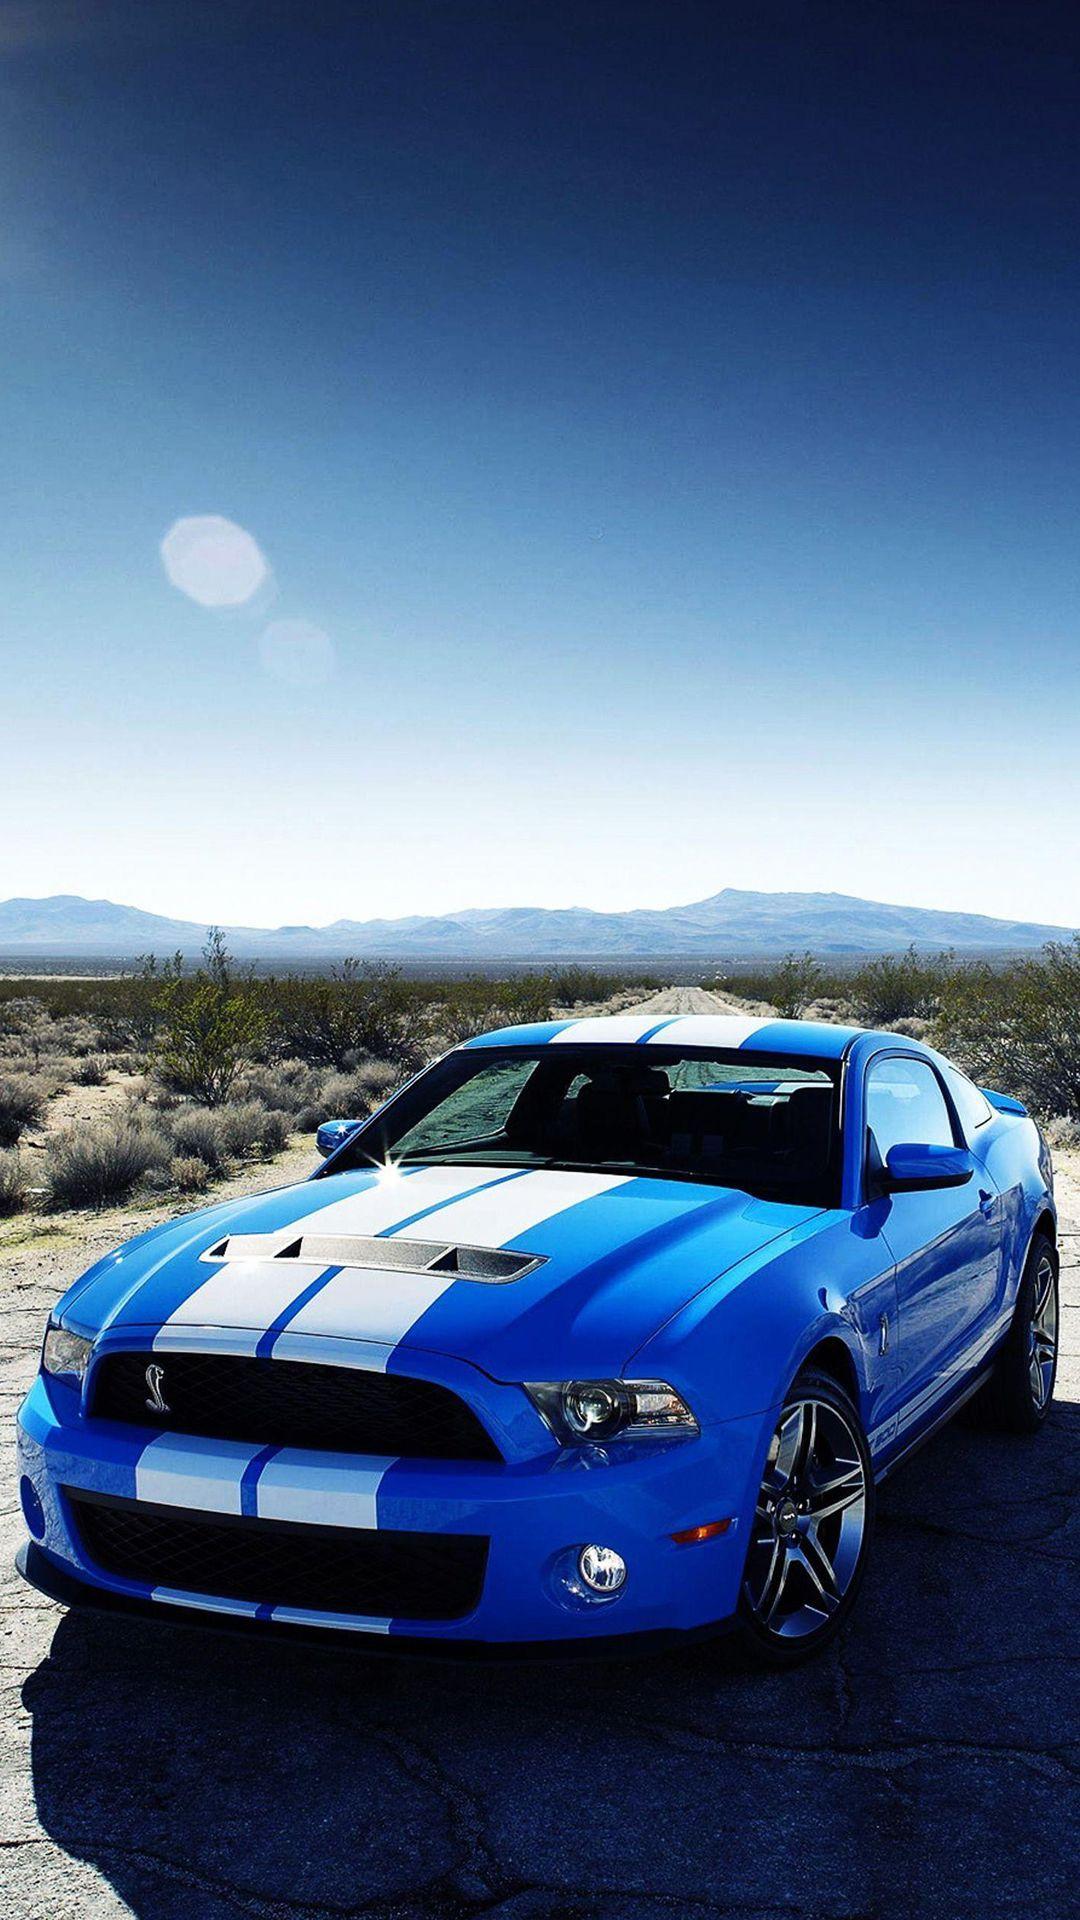 Speed Ford Car iPhone 8 Wallpaper. Autos mustang, Autos